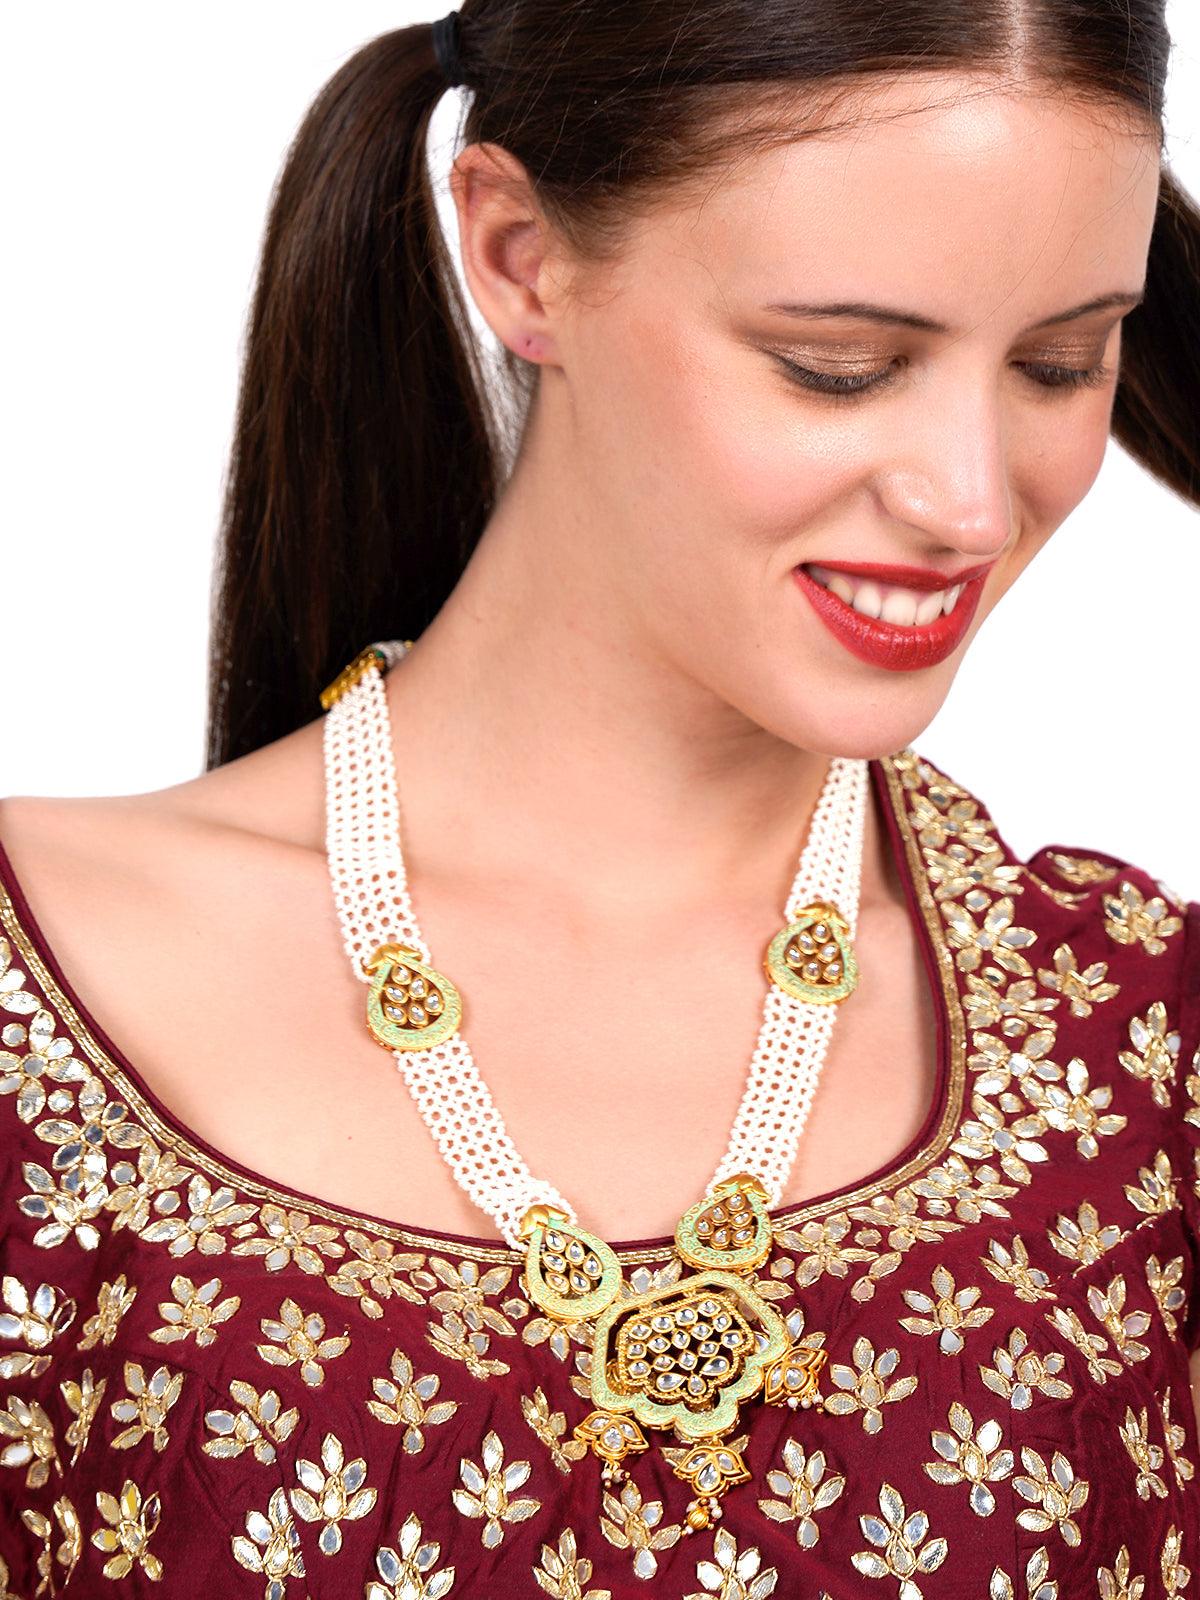 Lovely classical semiprecious kundan &amp; pearl green necklace with earrings! - Odette